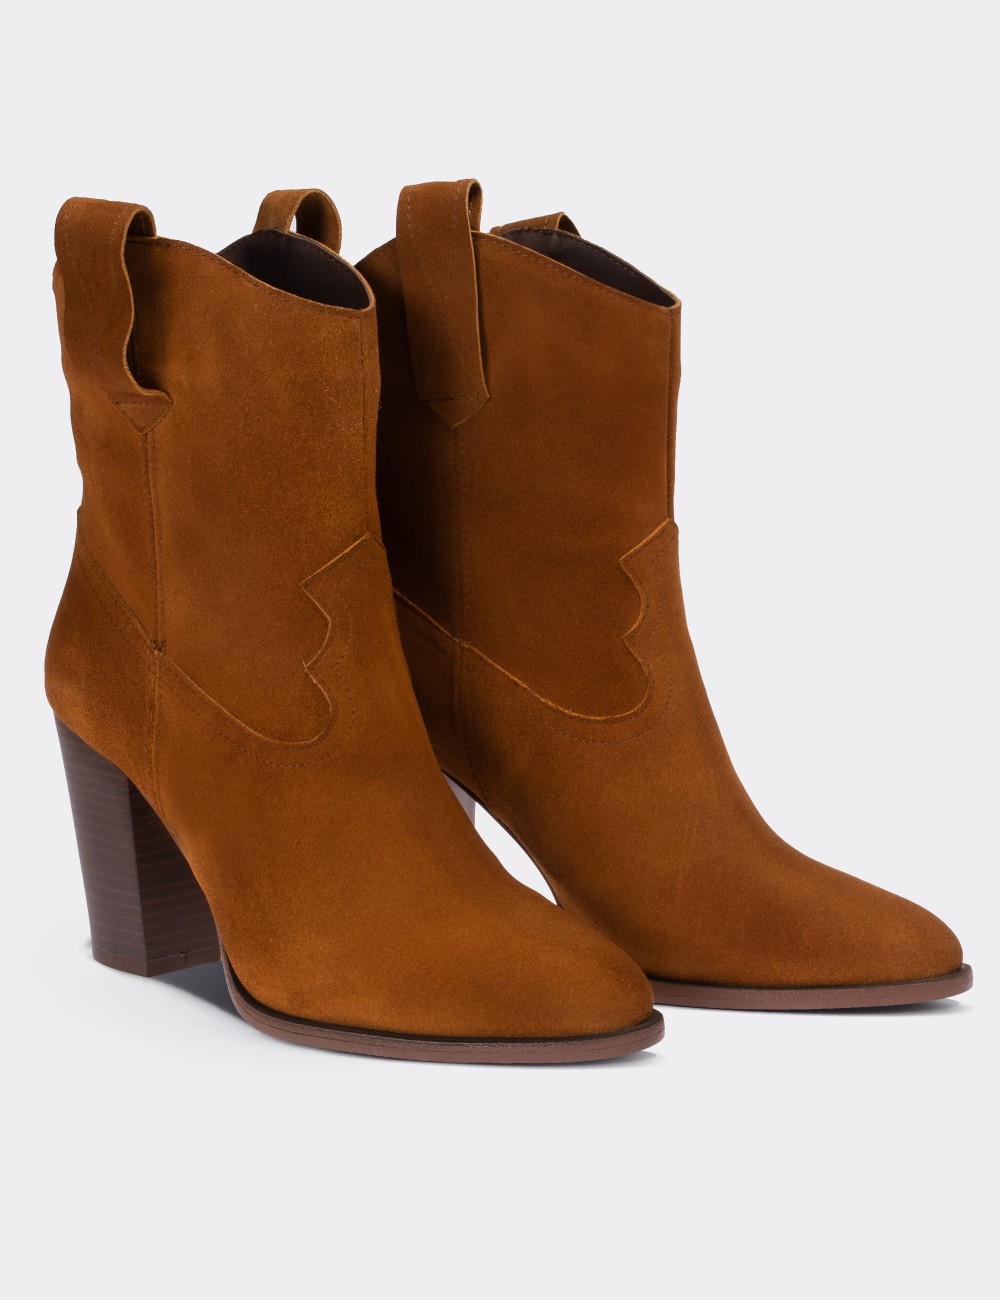 Tan Suede Leather Boots - E4460ZTBAC01